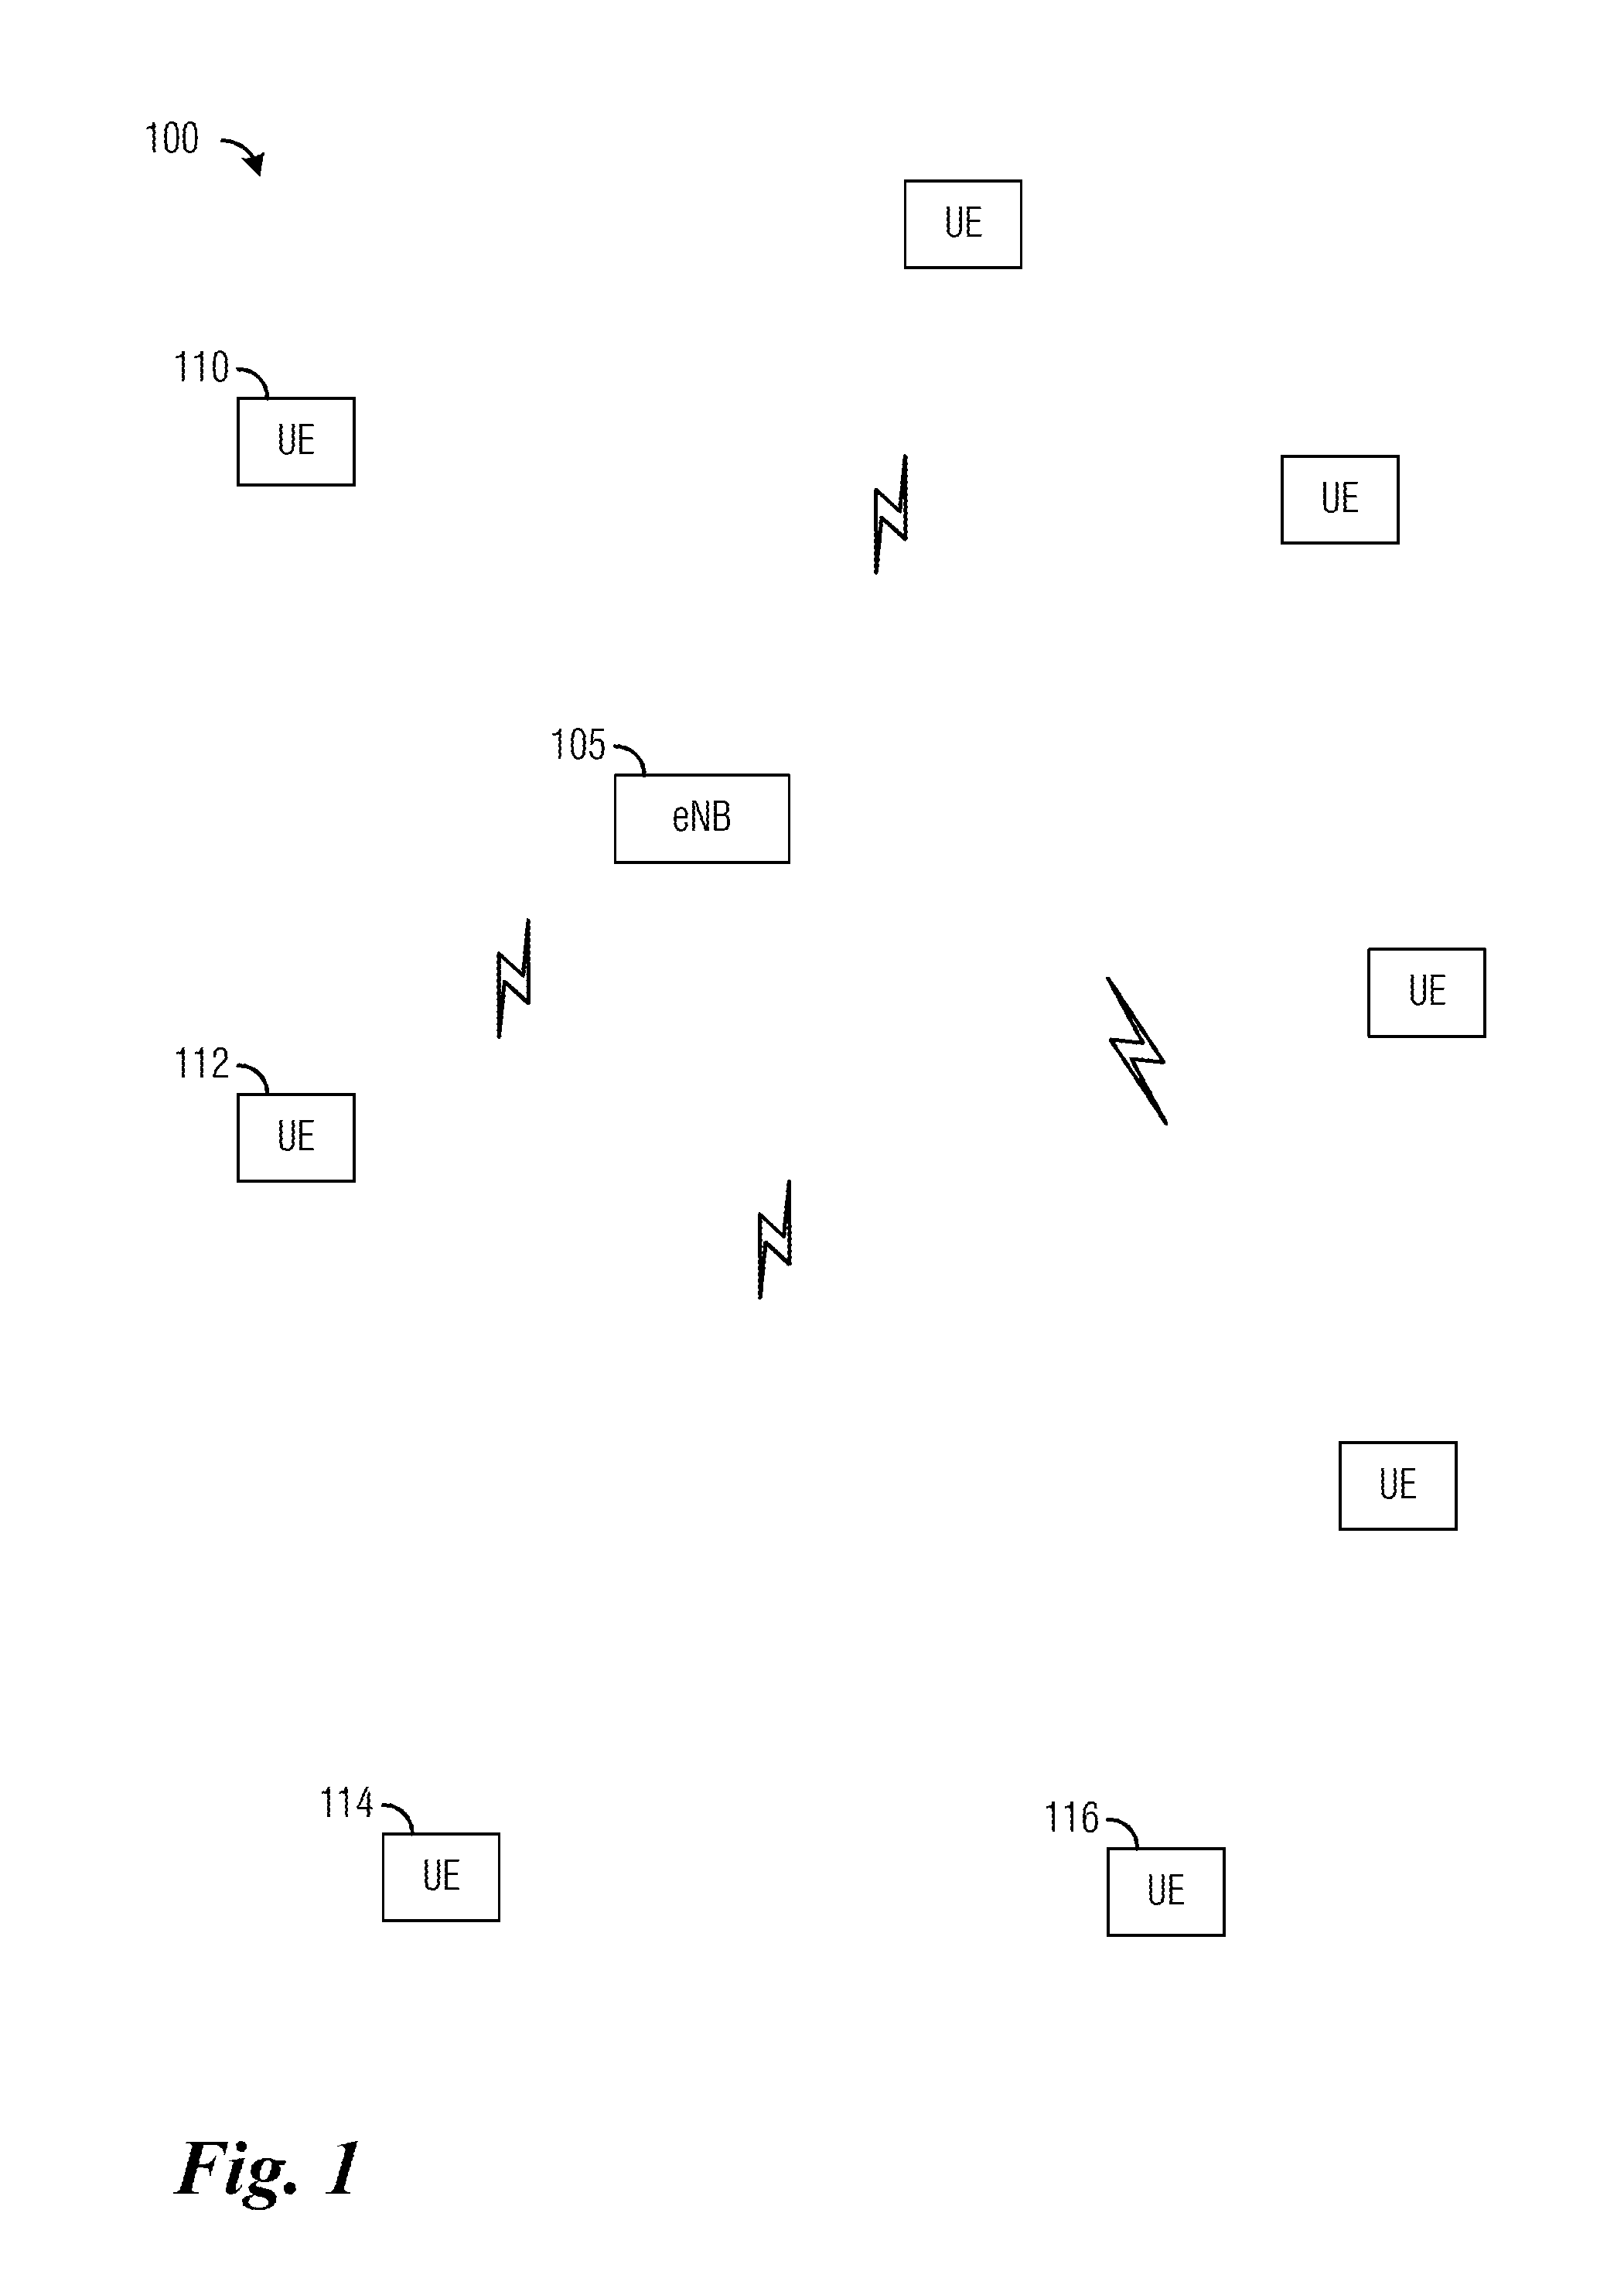 System And Method For Reduced Signaling Transmissions In A Communications System